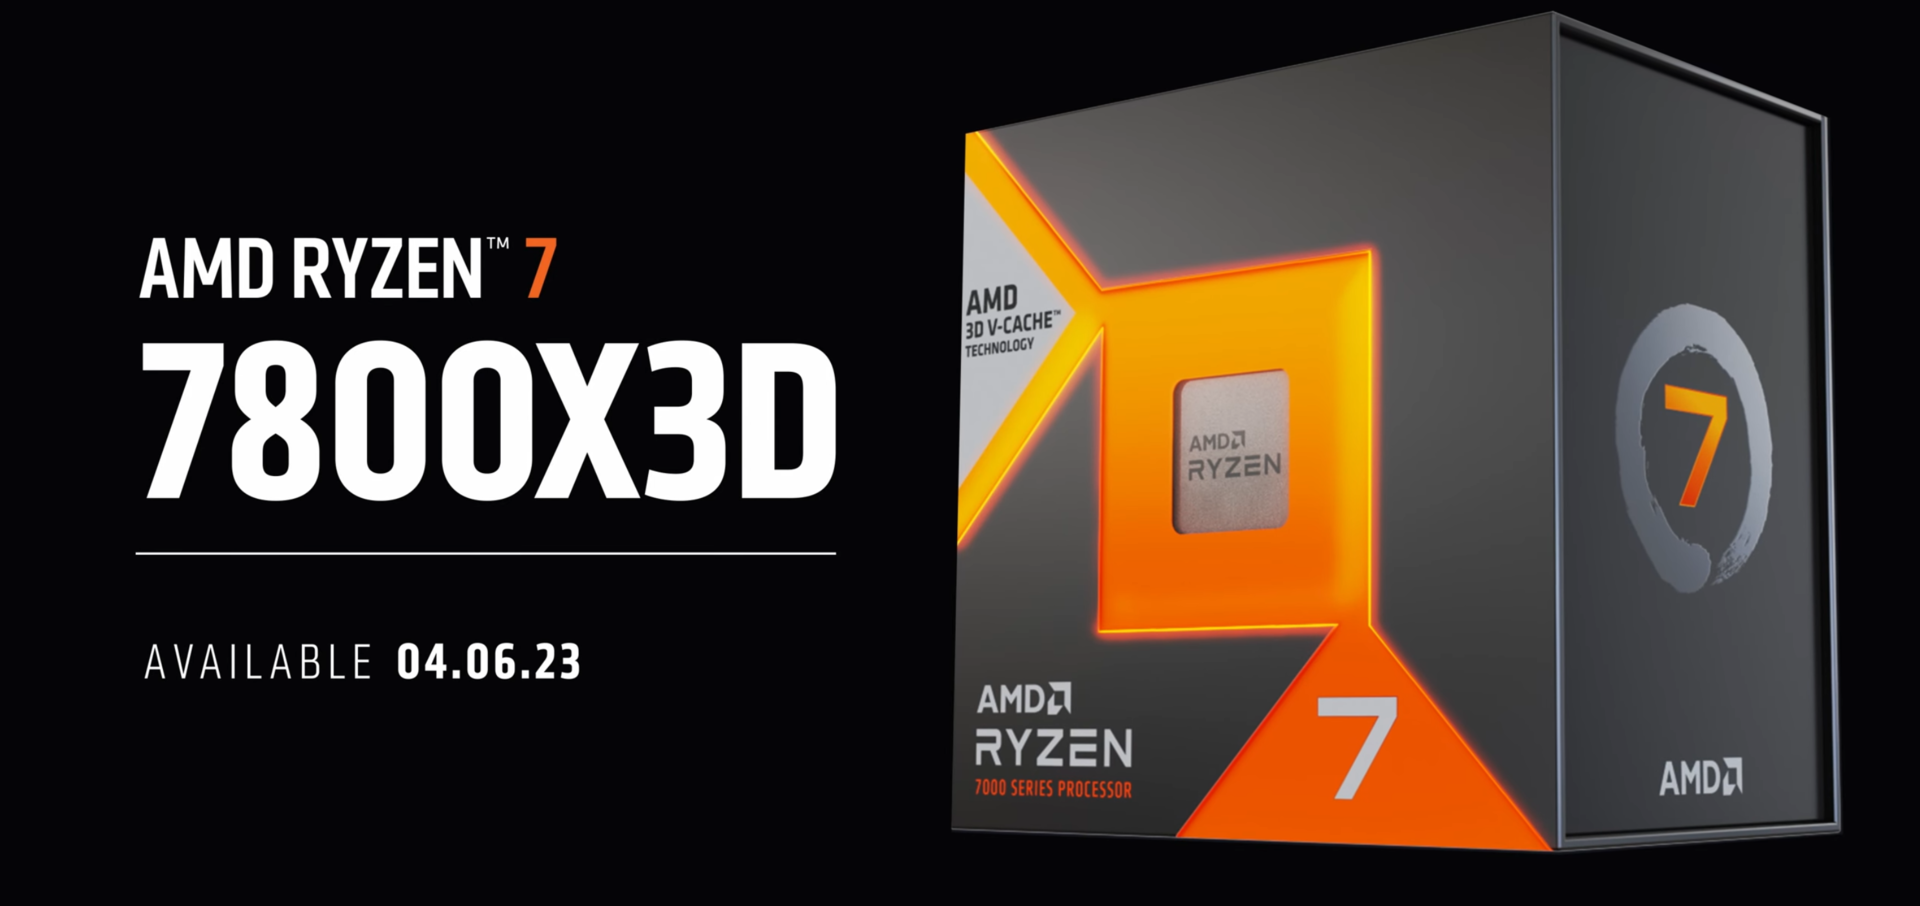 AMD Ryzen 7 7800X3D and Ryzen 9 7950X3D could offer up to a 30% performance  uplift over their non-3D counterparts -  News